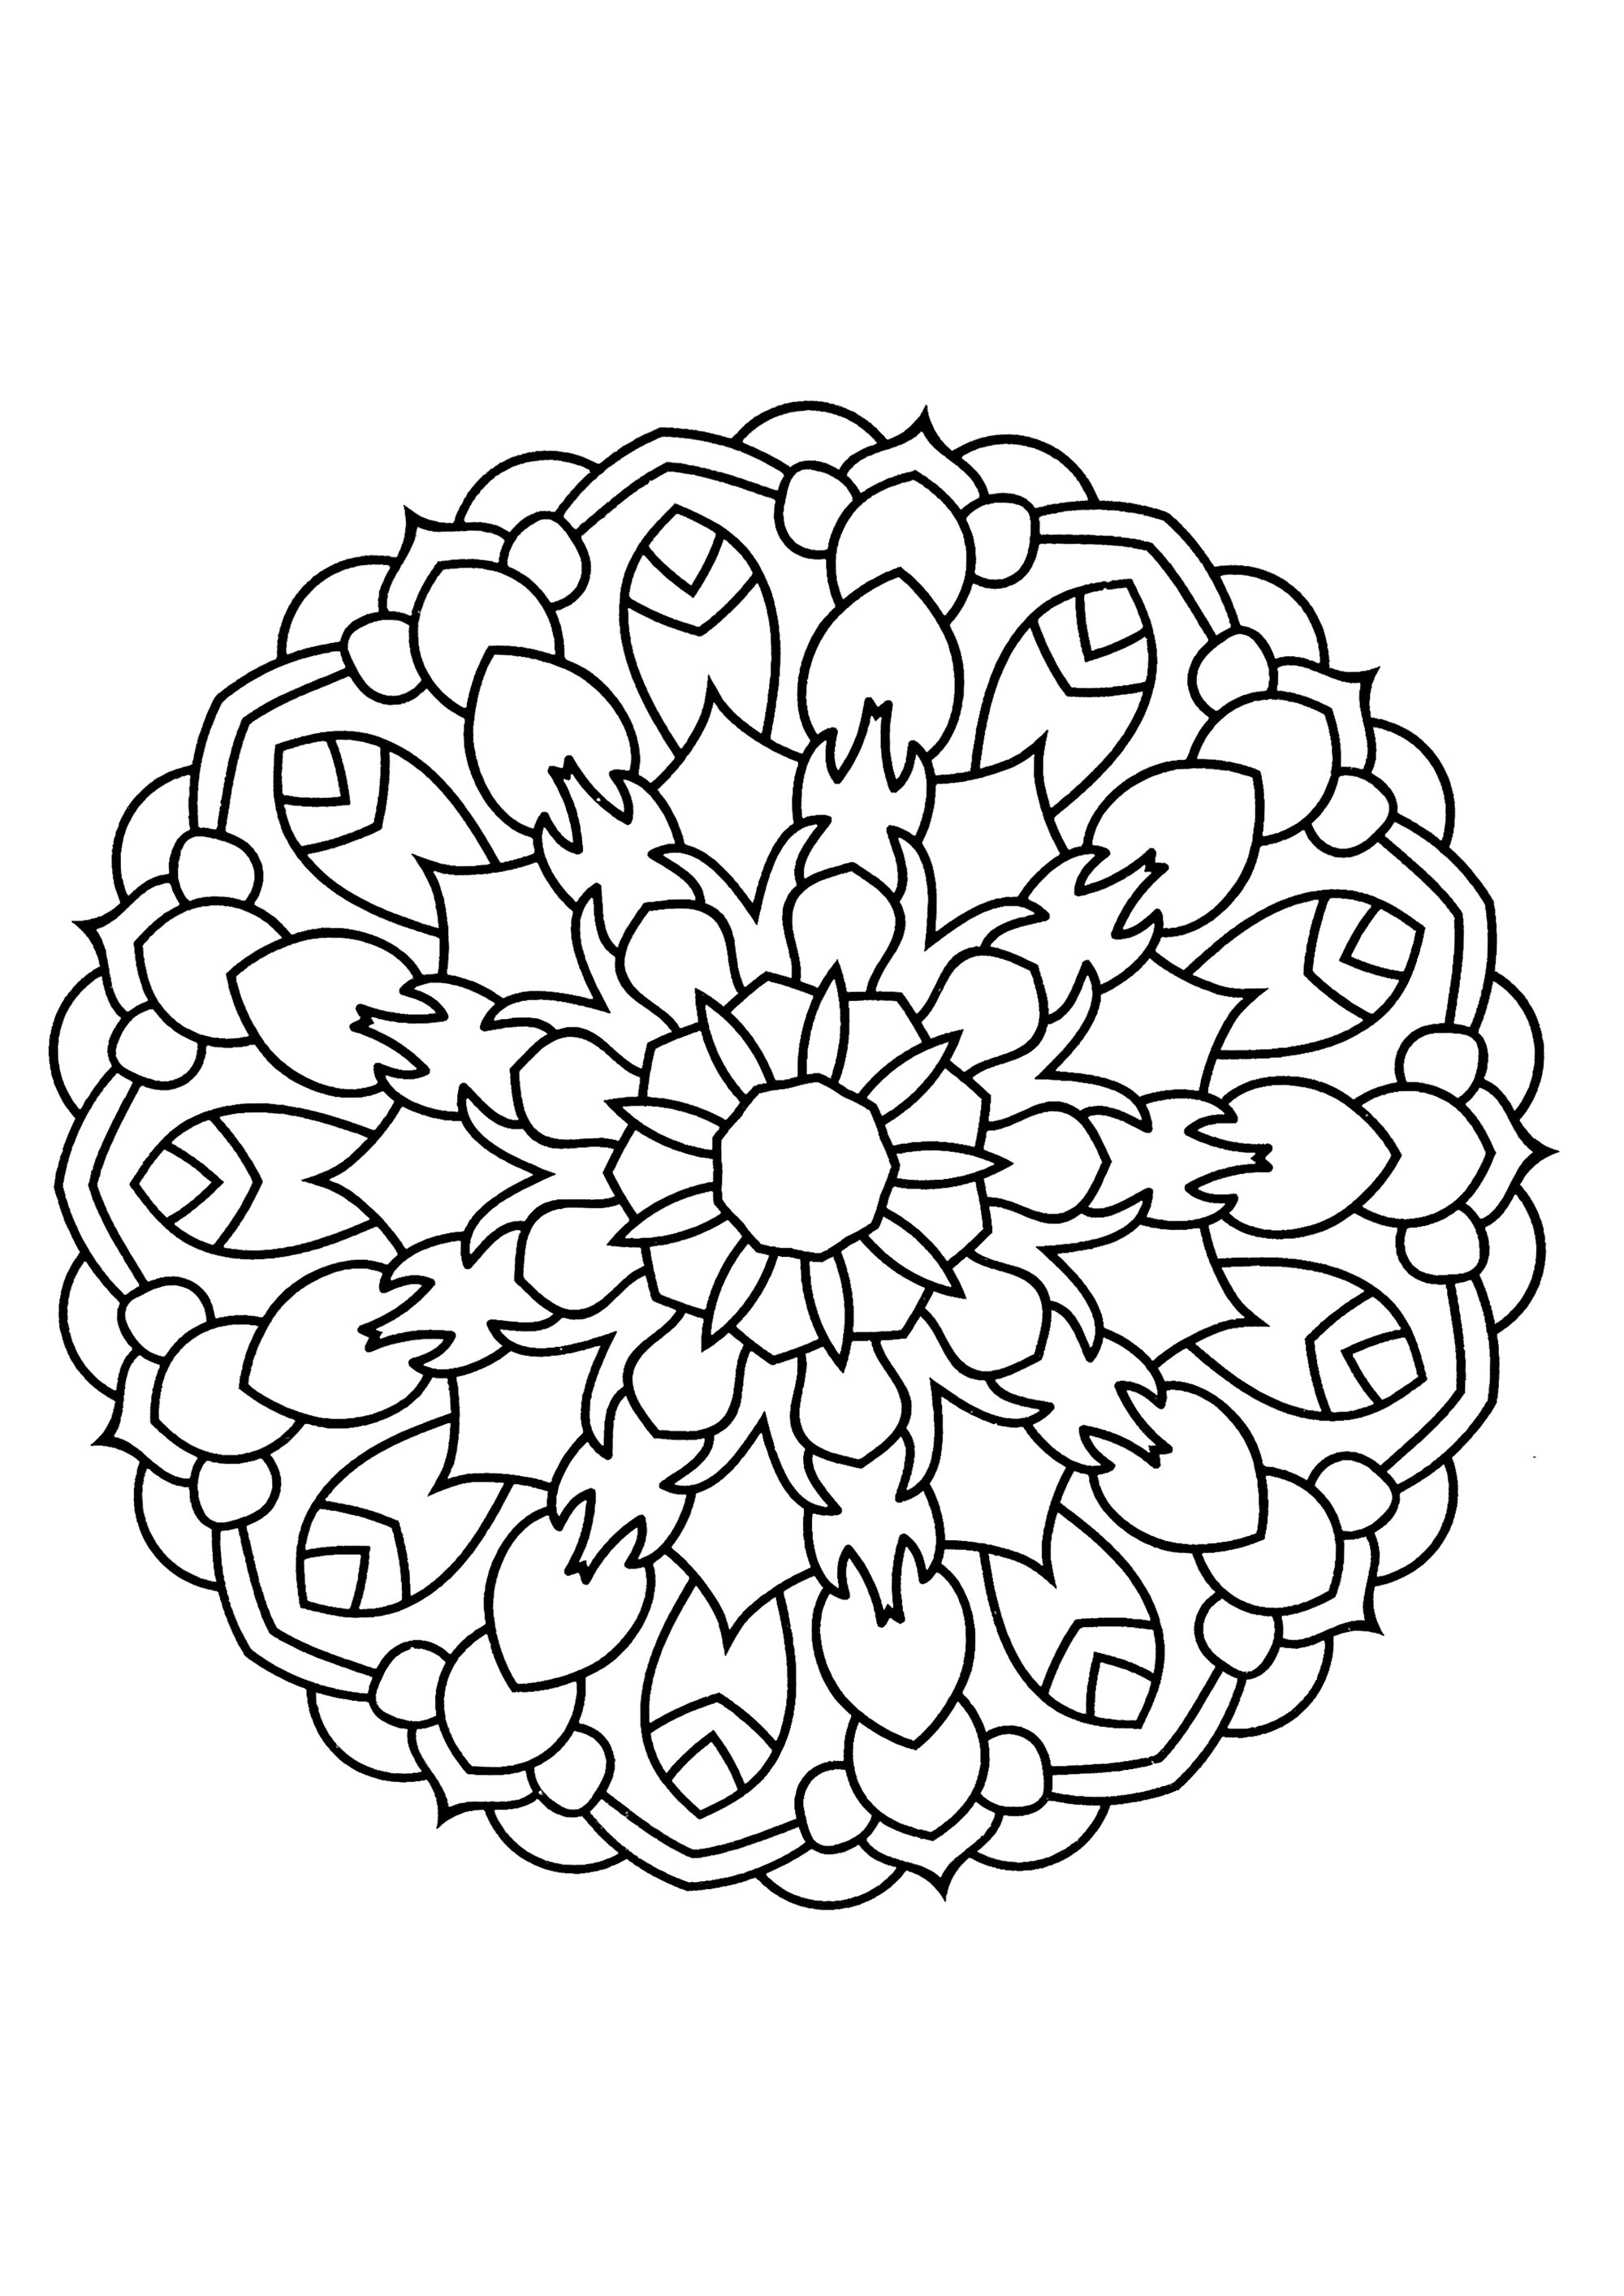 Mandala with broad strokes, quite simple